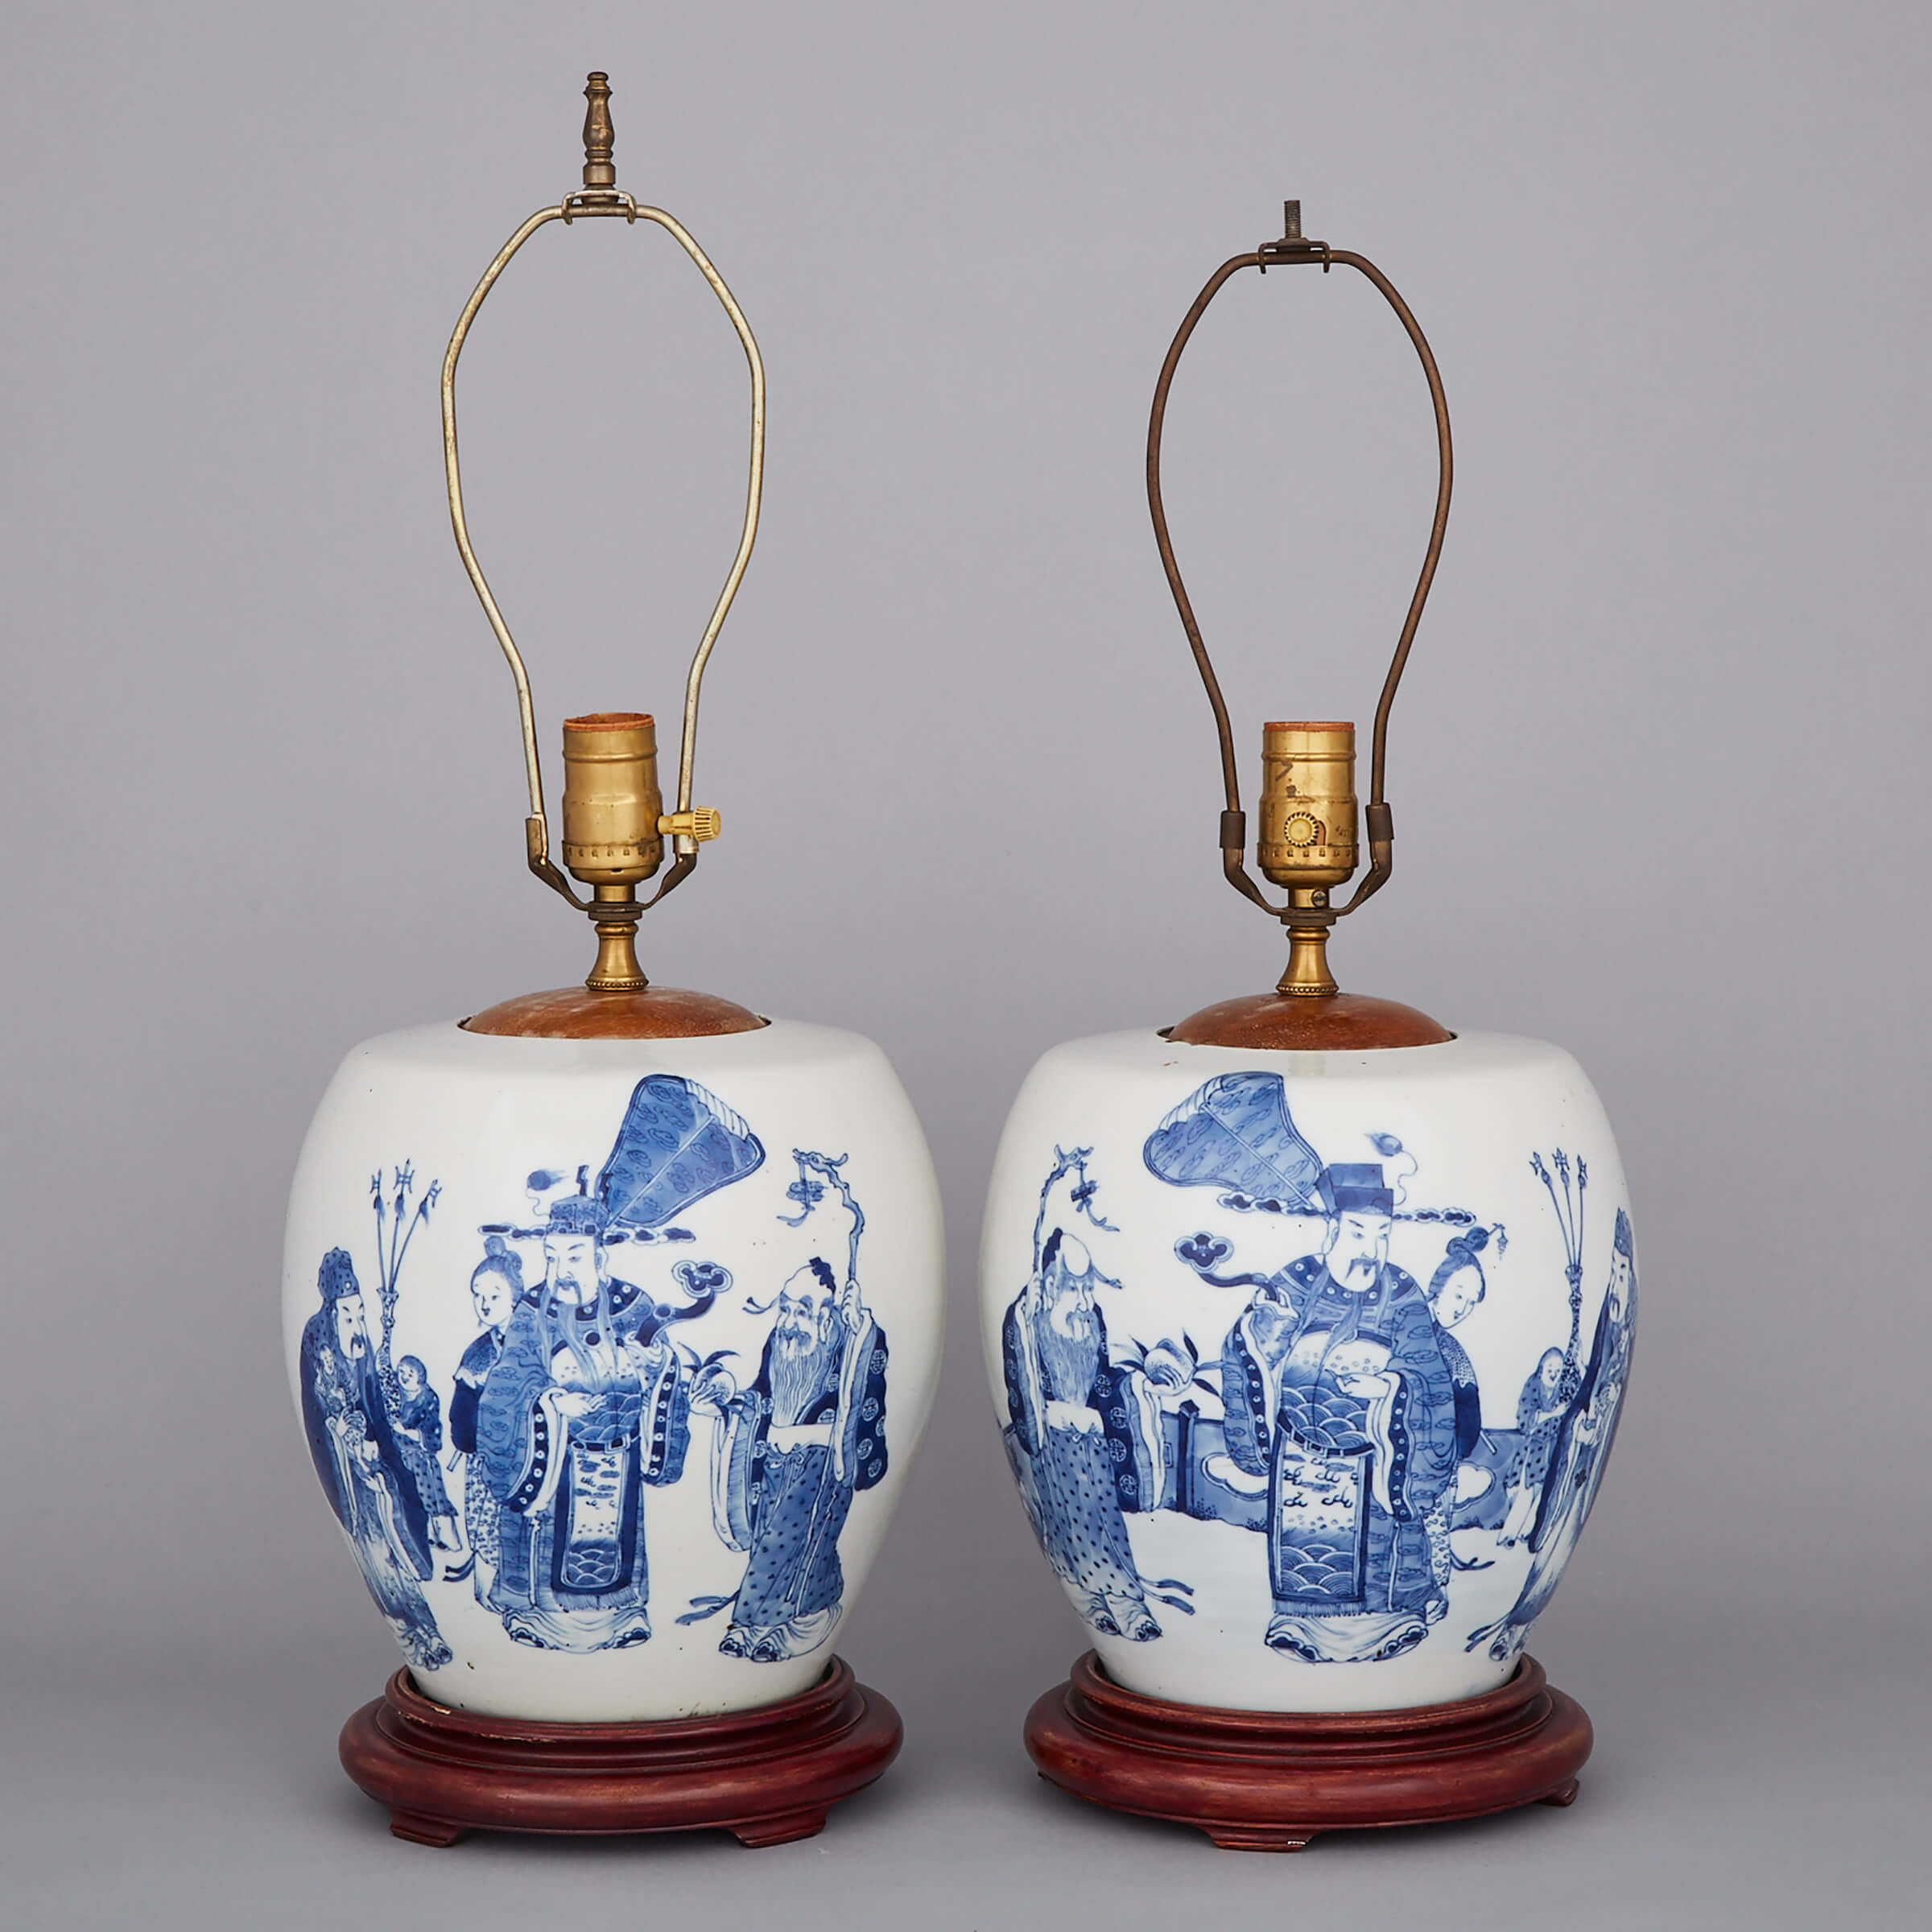 A Pair of Blue and White Vase Lamps, 19th Century